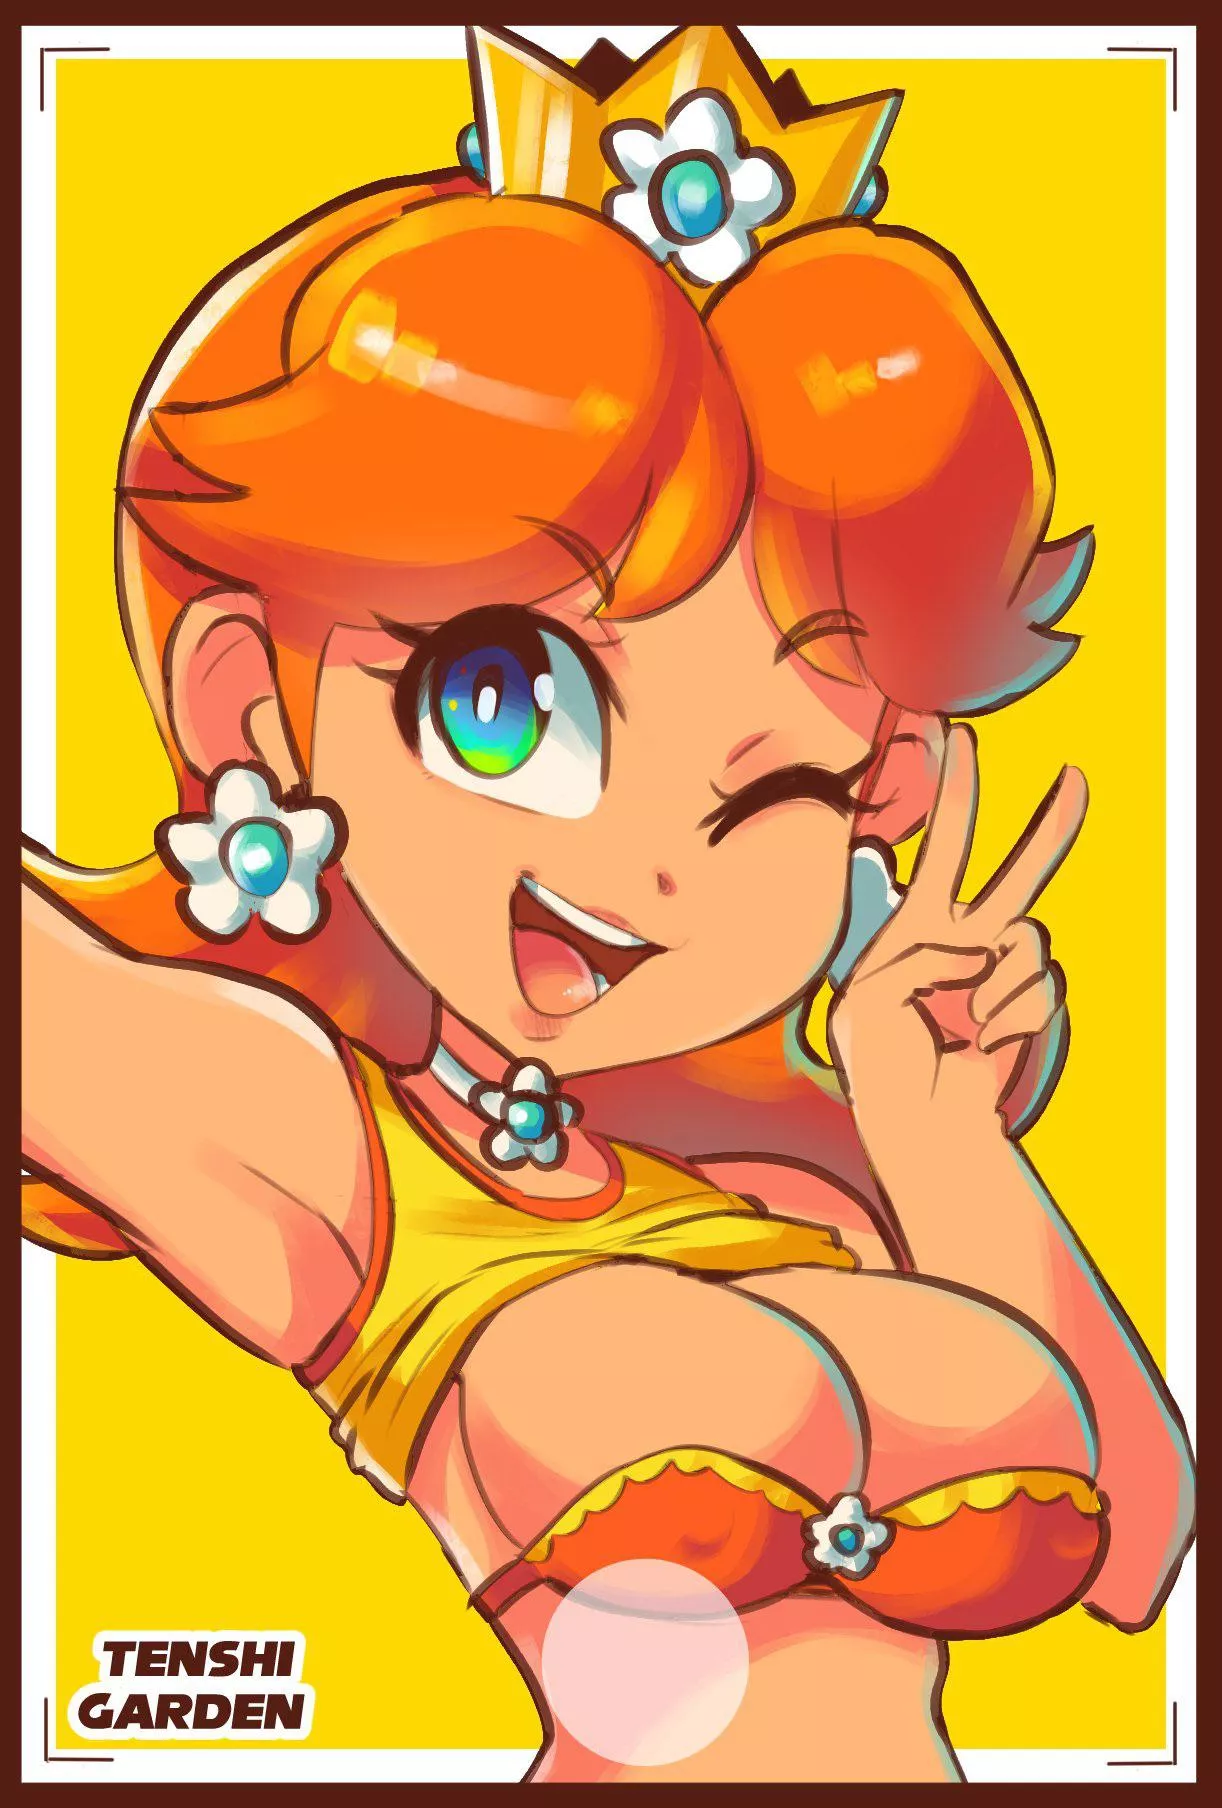 1222px x 1808px - Princess Daisy taking a picture (TenshiGarden) [Super Mario Bros.] nudes by  organizeit2